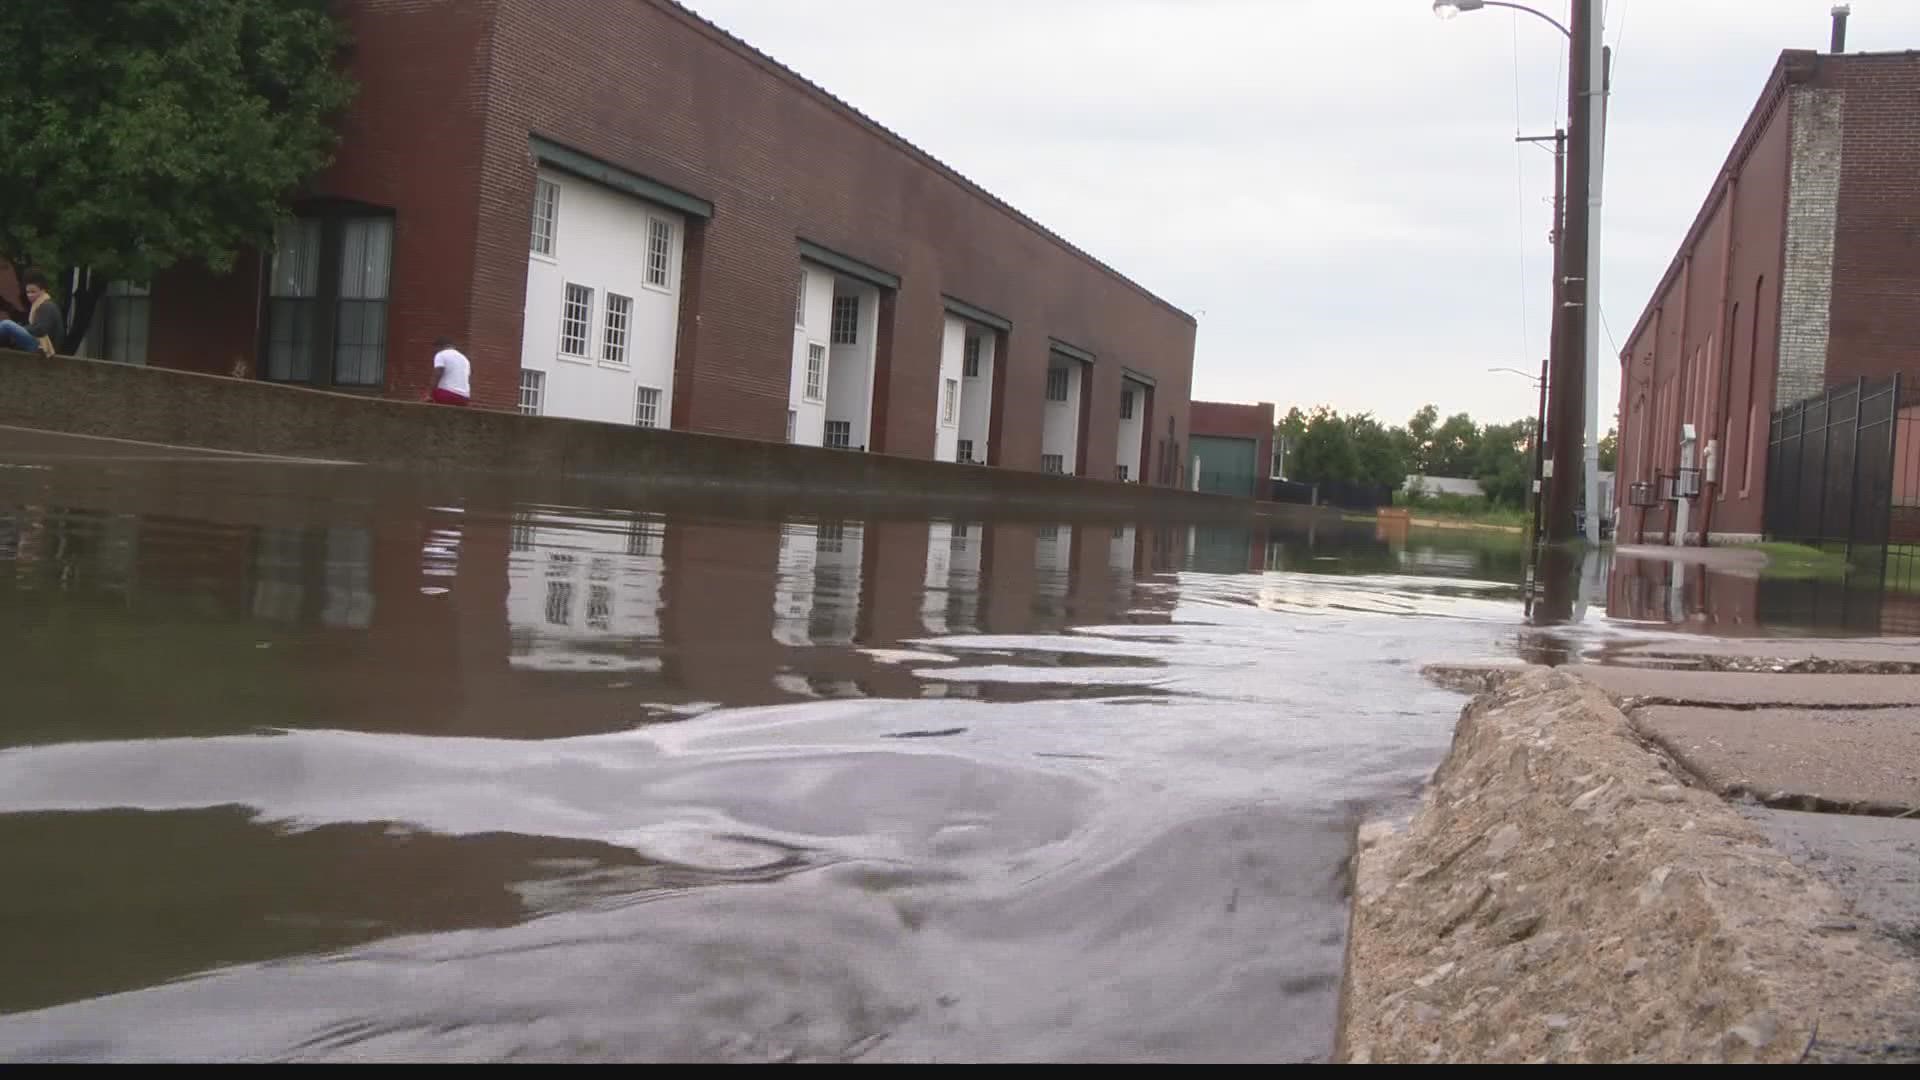 The St. Louis area saw more flooding Thursday just two days after historic rainfall moved through the region.